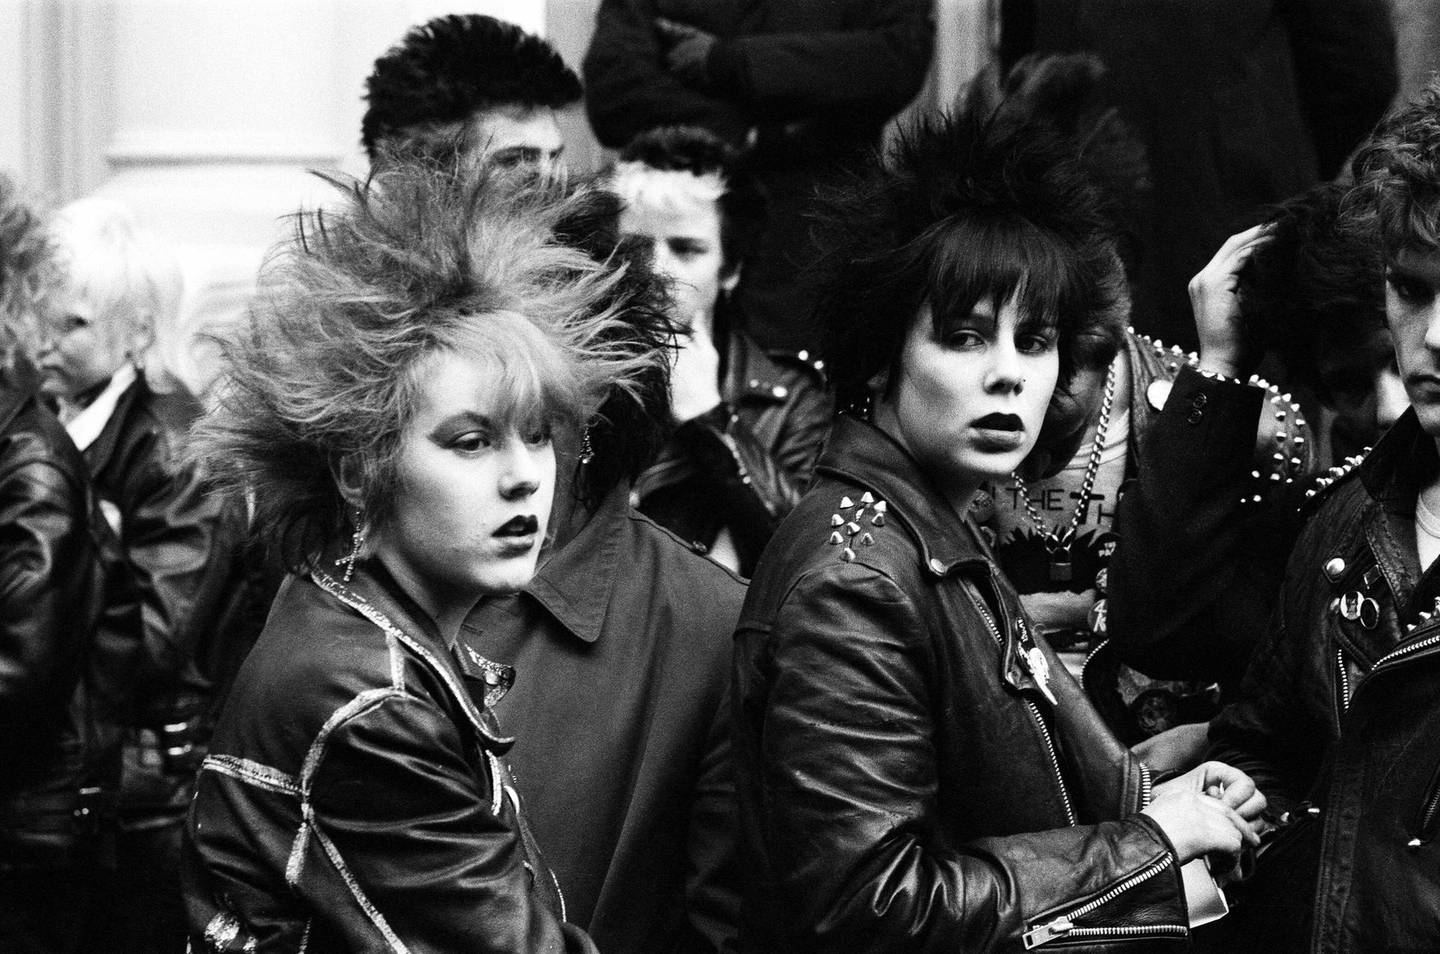 Punk rockers march in London. 3rd February 1980. (Photo by Staff/Mirrorpix/Getty Images)